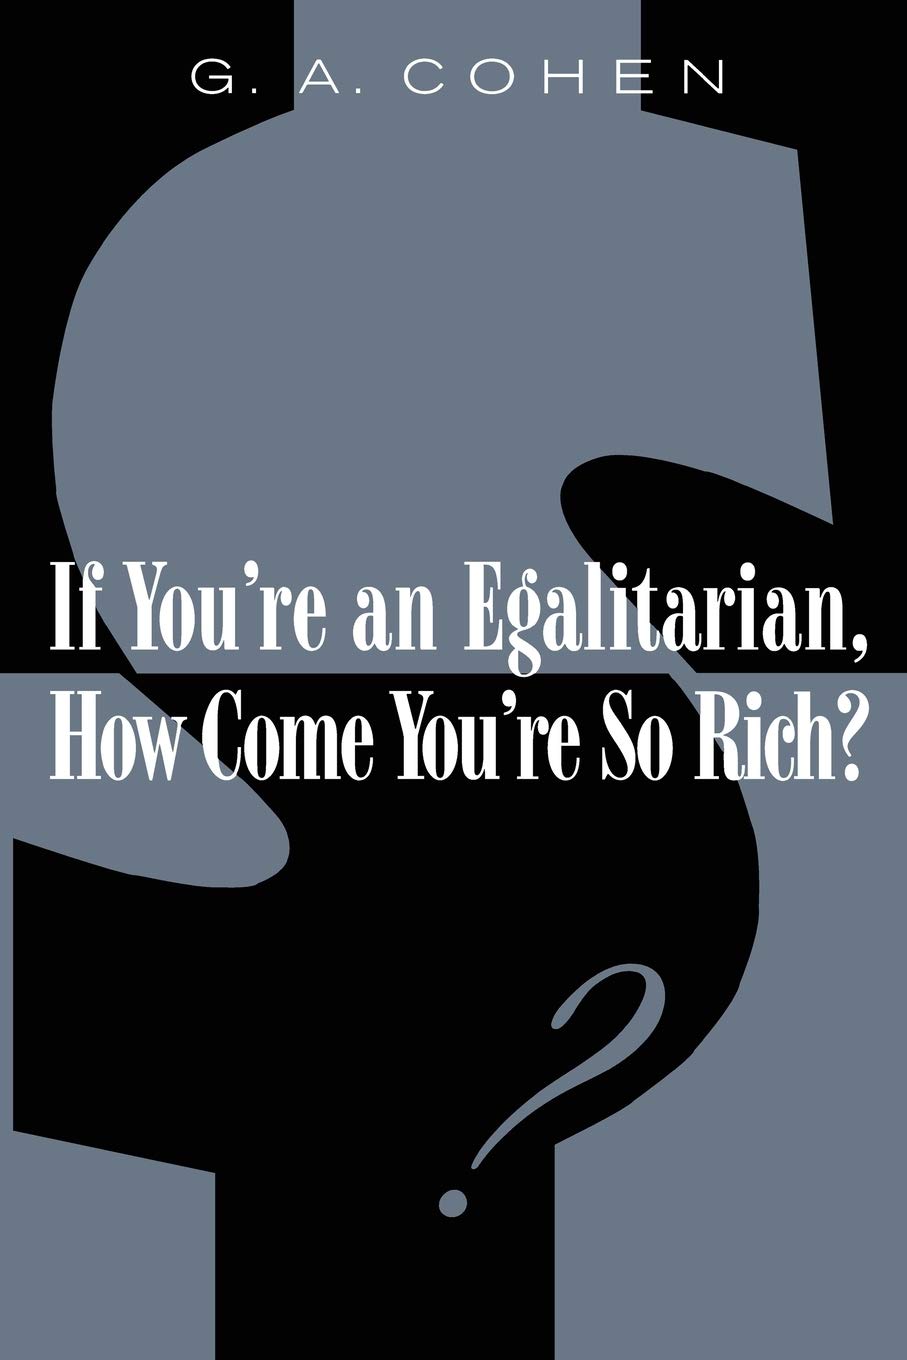 If You’re an Egalitarian How come You’re So Rich